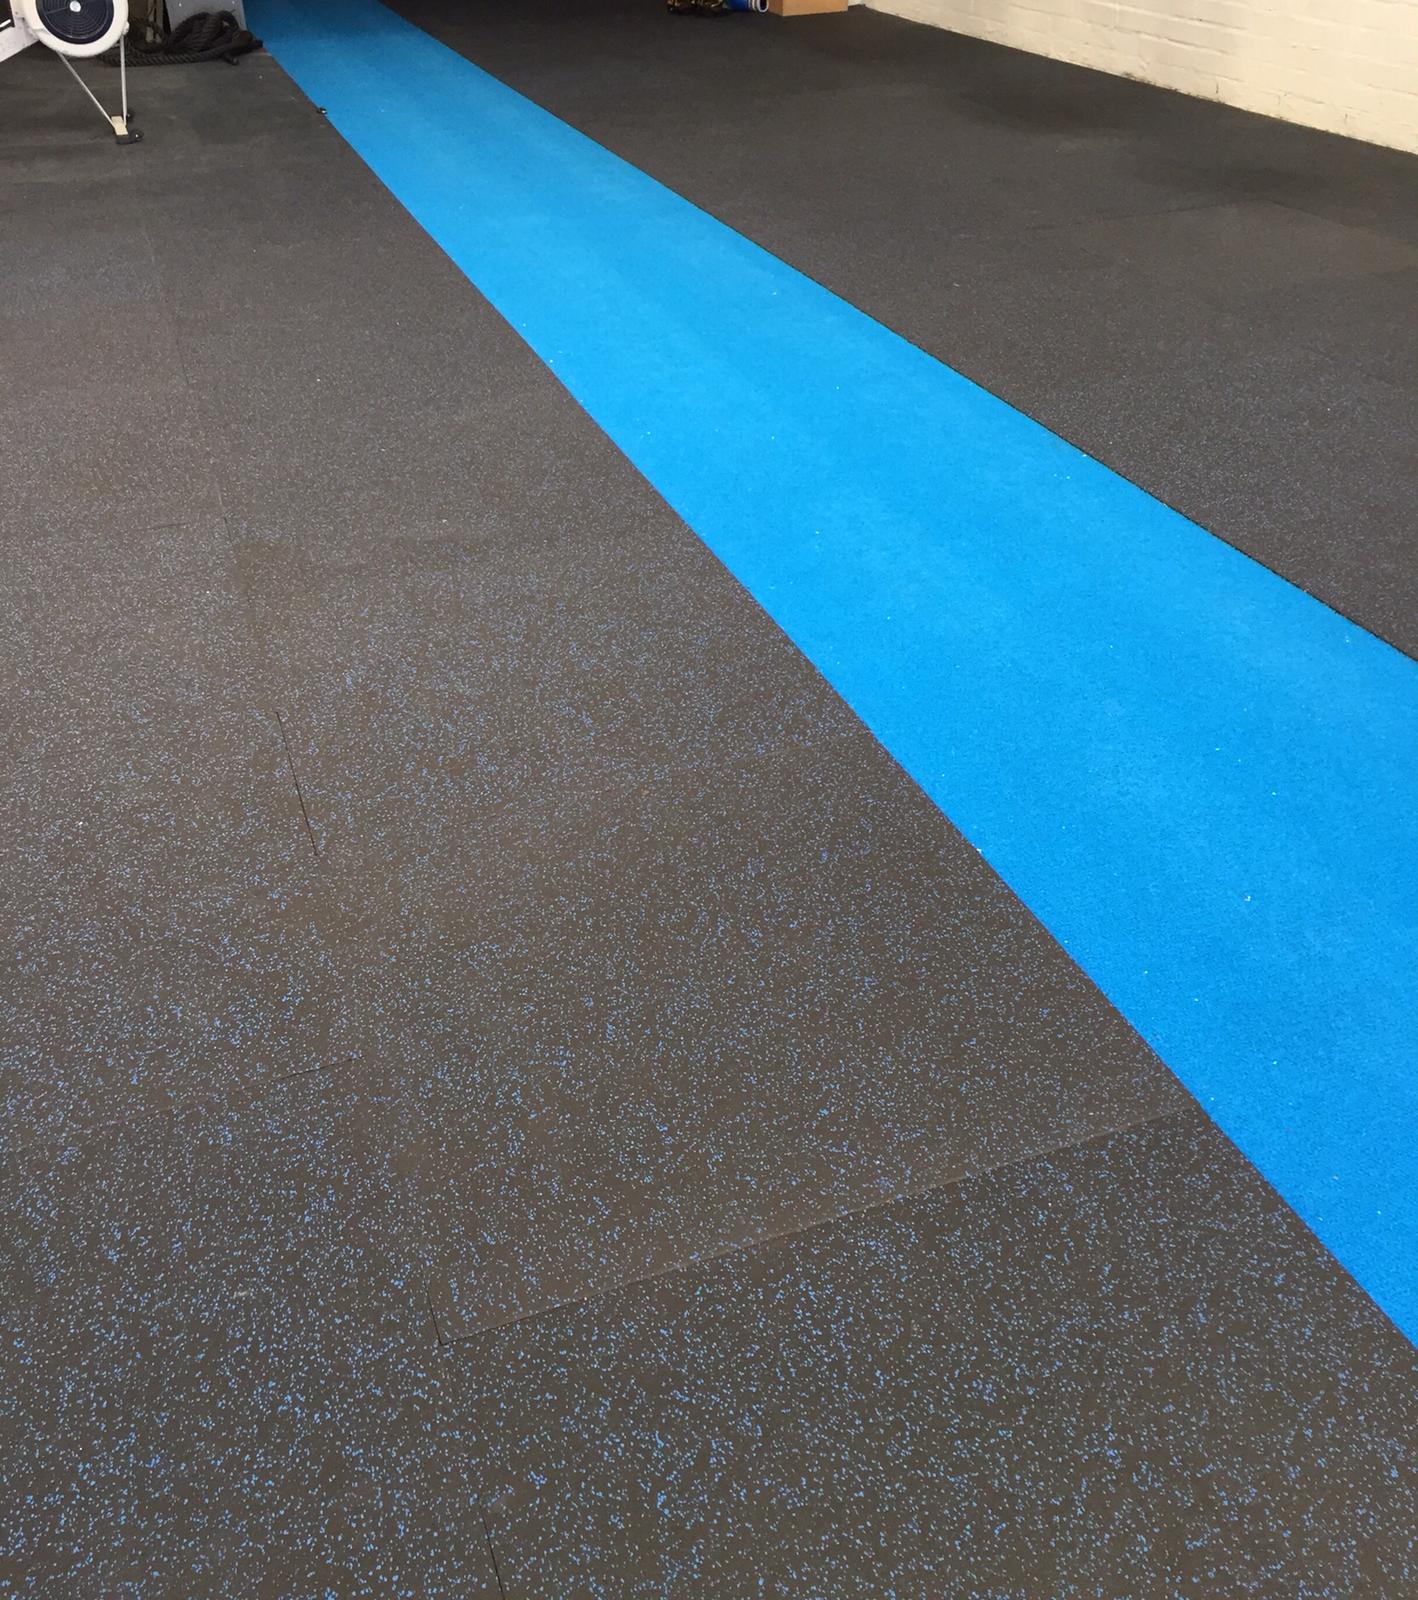 15mm Rubber Gym Flooring With Blue Fleck Fitness Equipment Ireland Best For Buying Gym Equipment